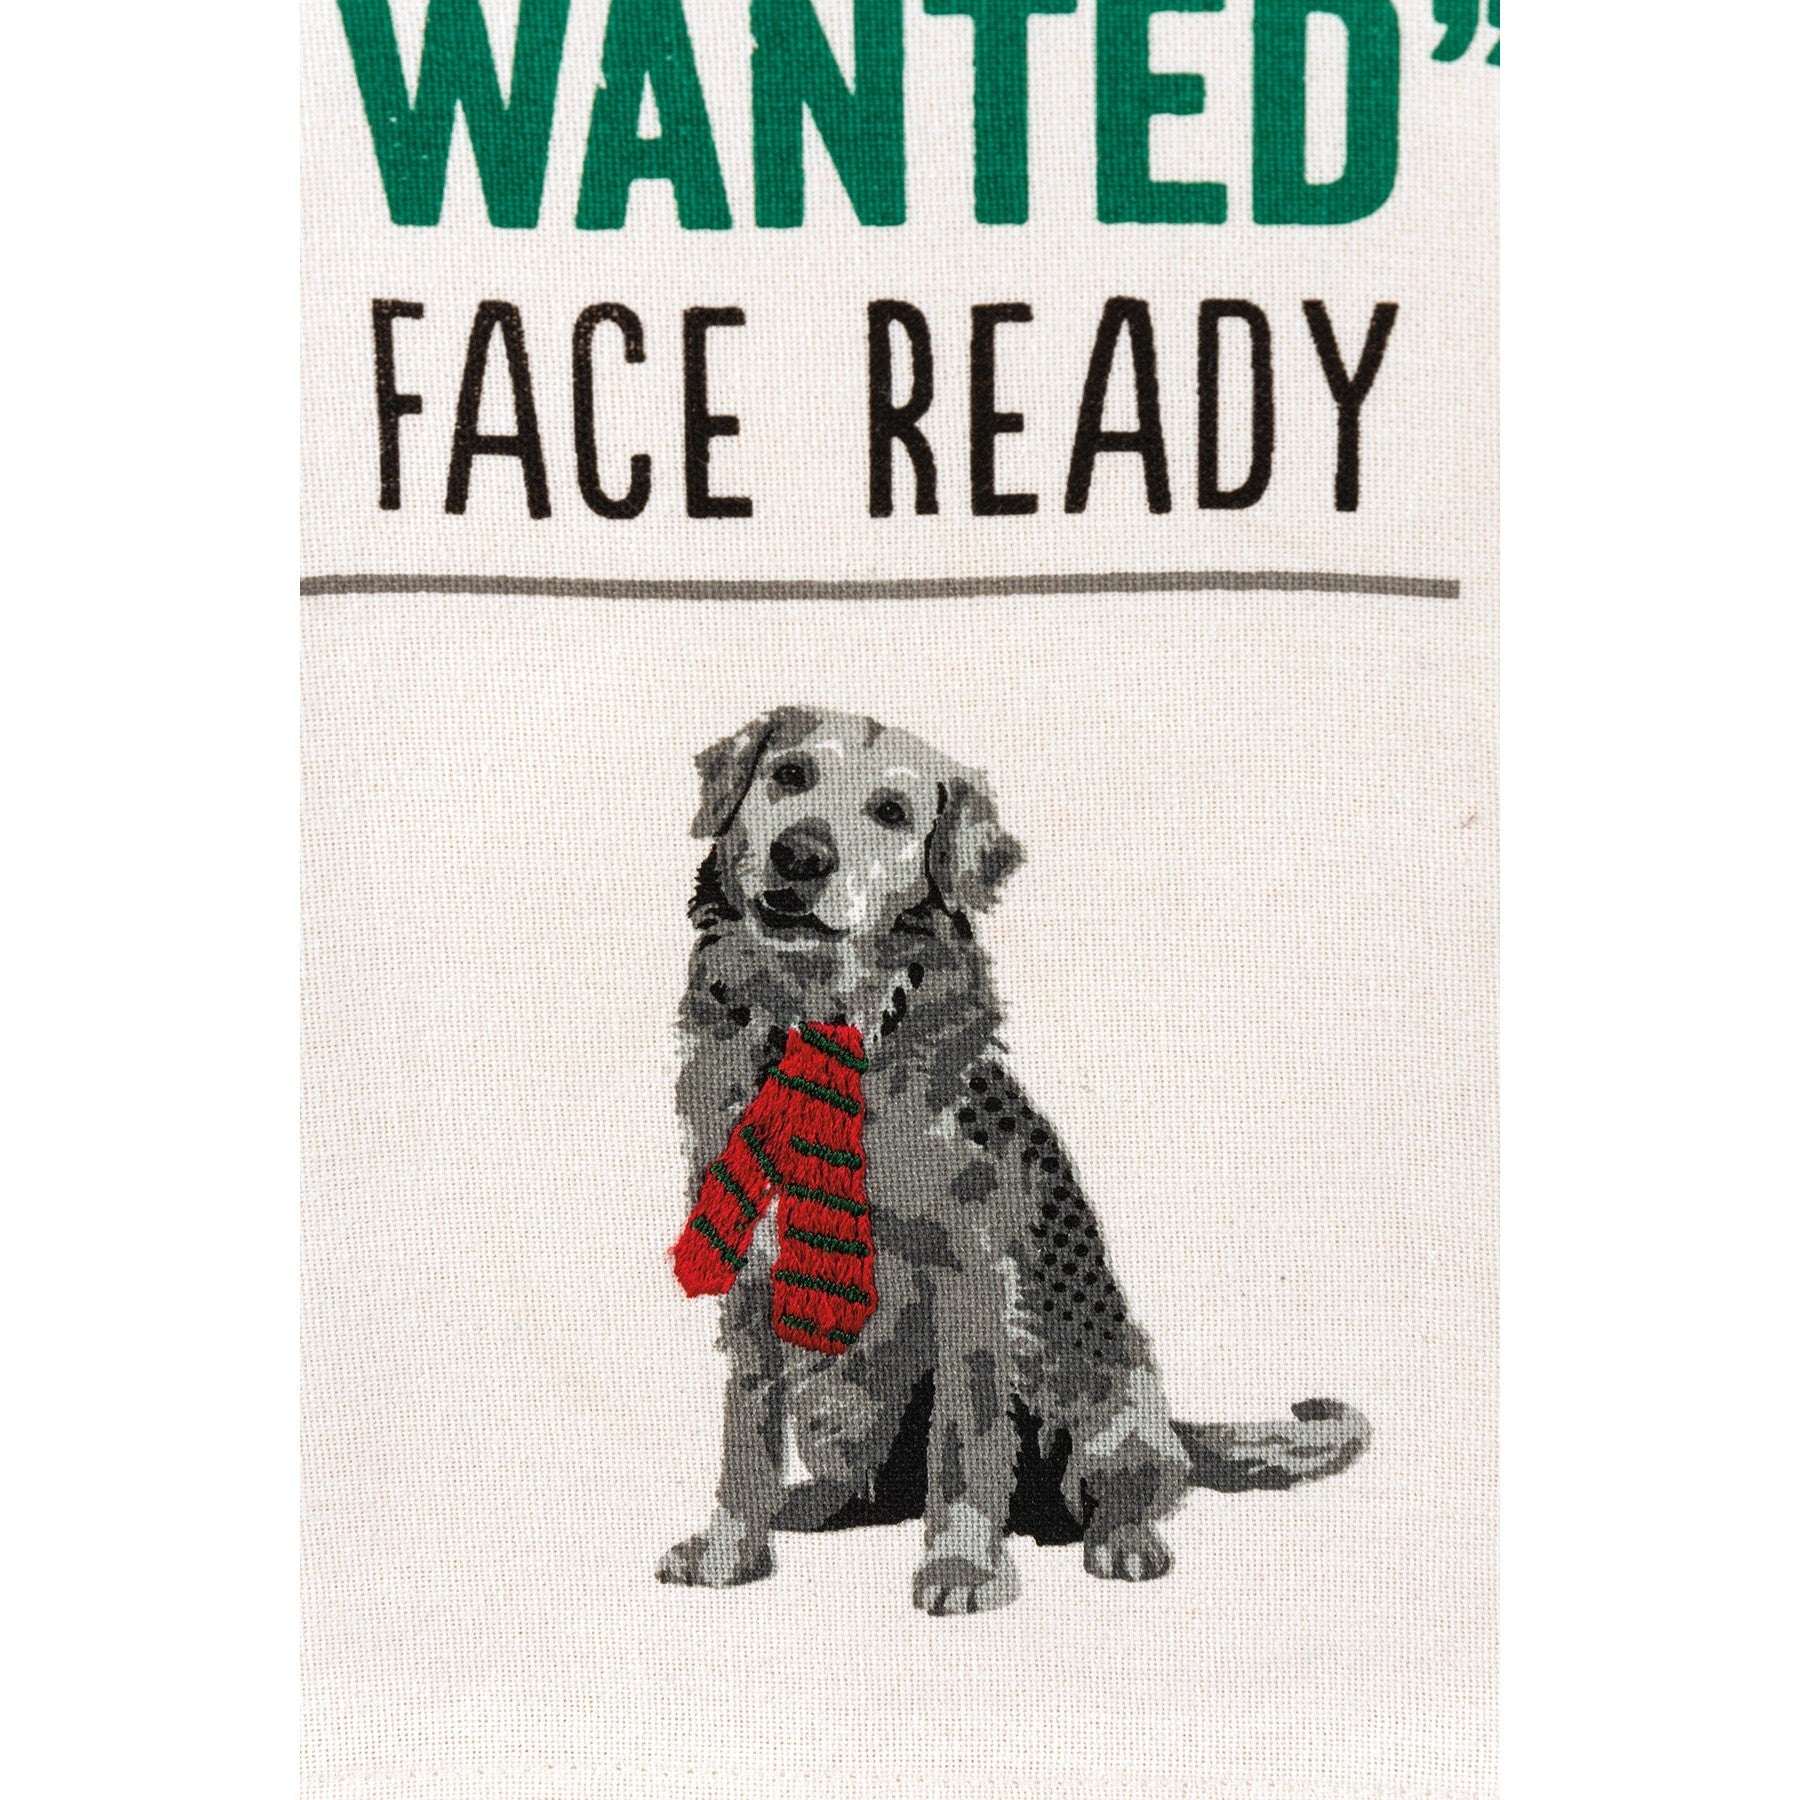 Your Just What I Wanted Face Dog Kitchen Towel | Hand Dish Cloth | 18" x 26"